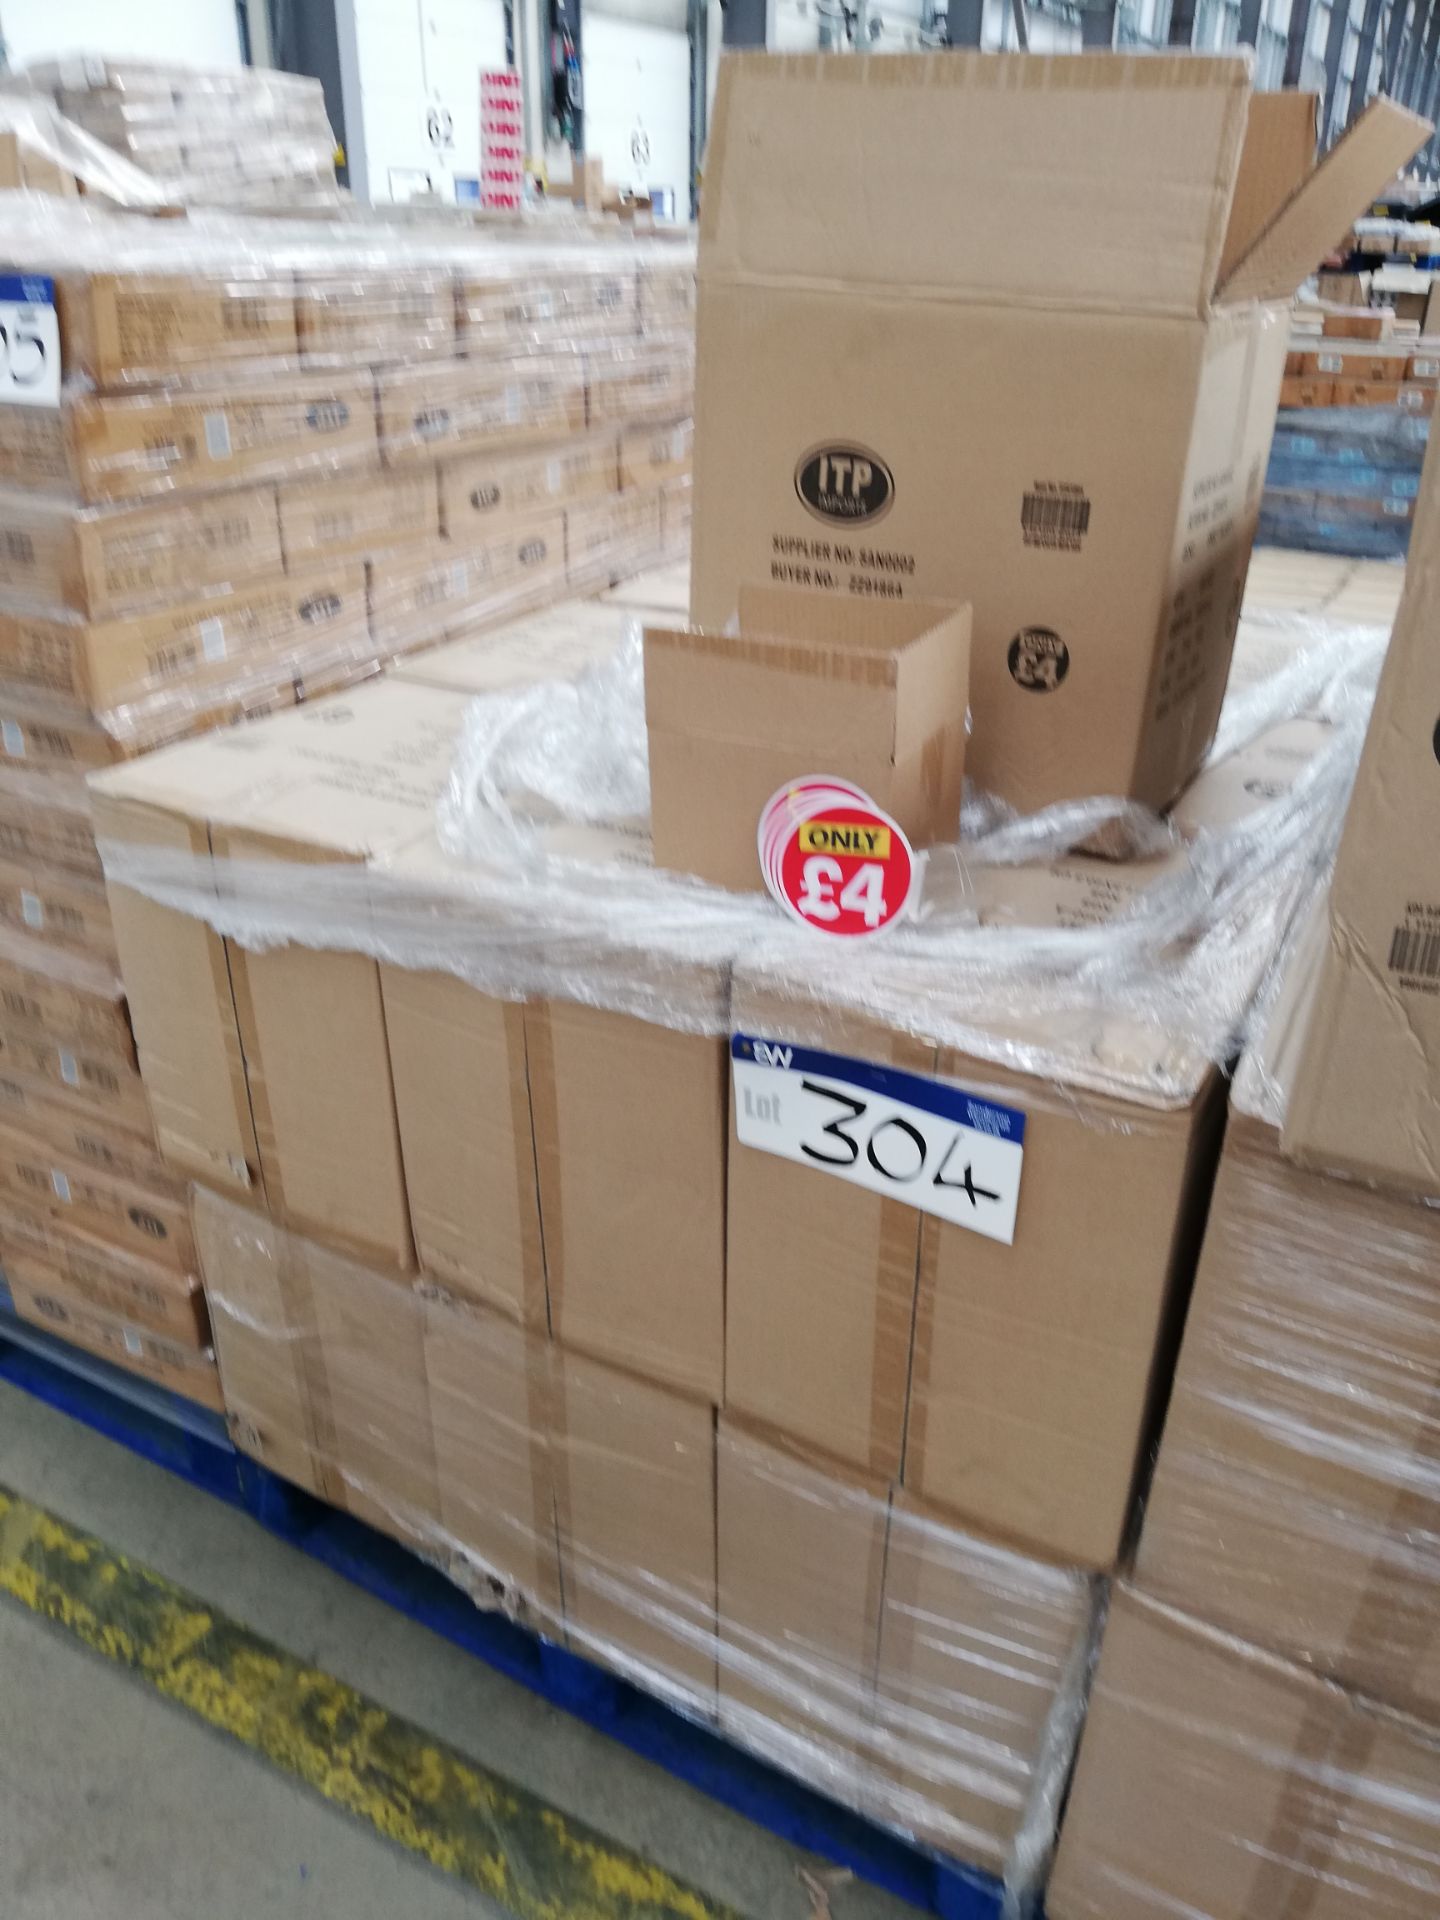 10,800 x Shelf Talkers ‘Any 3 for £2’ (Boxed)